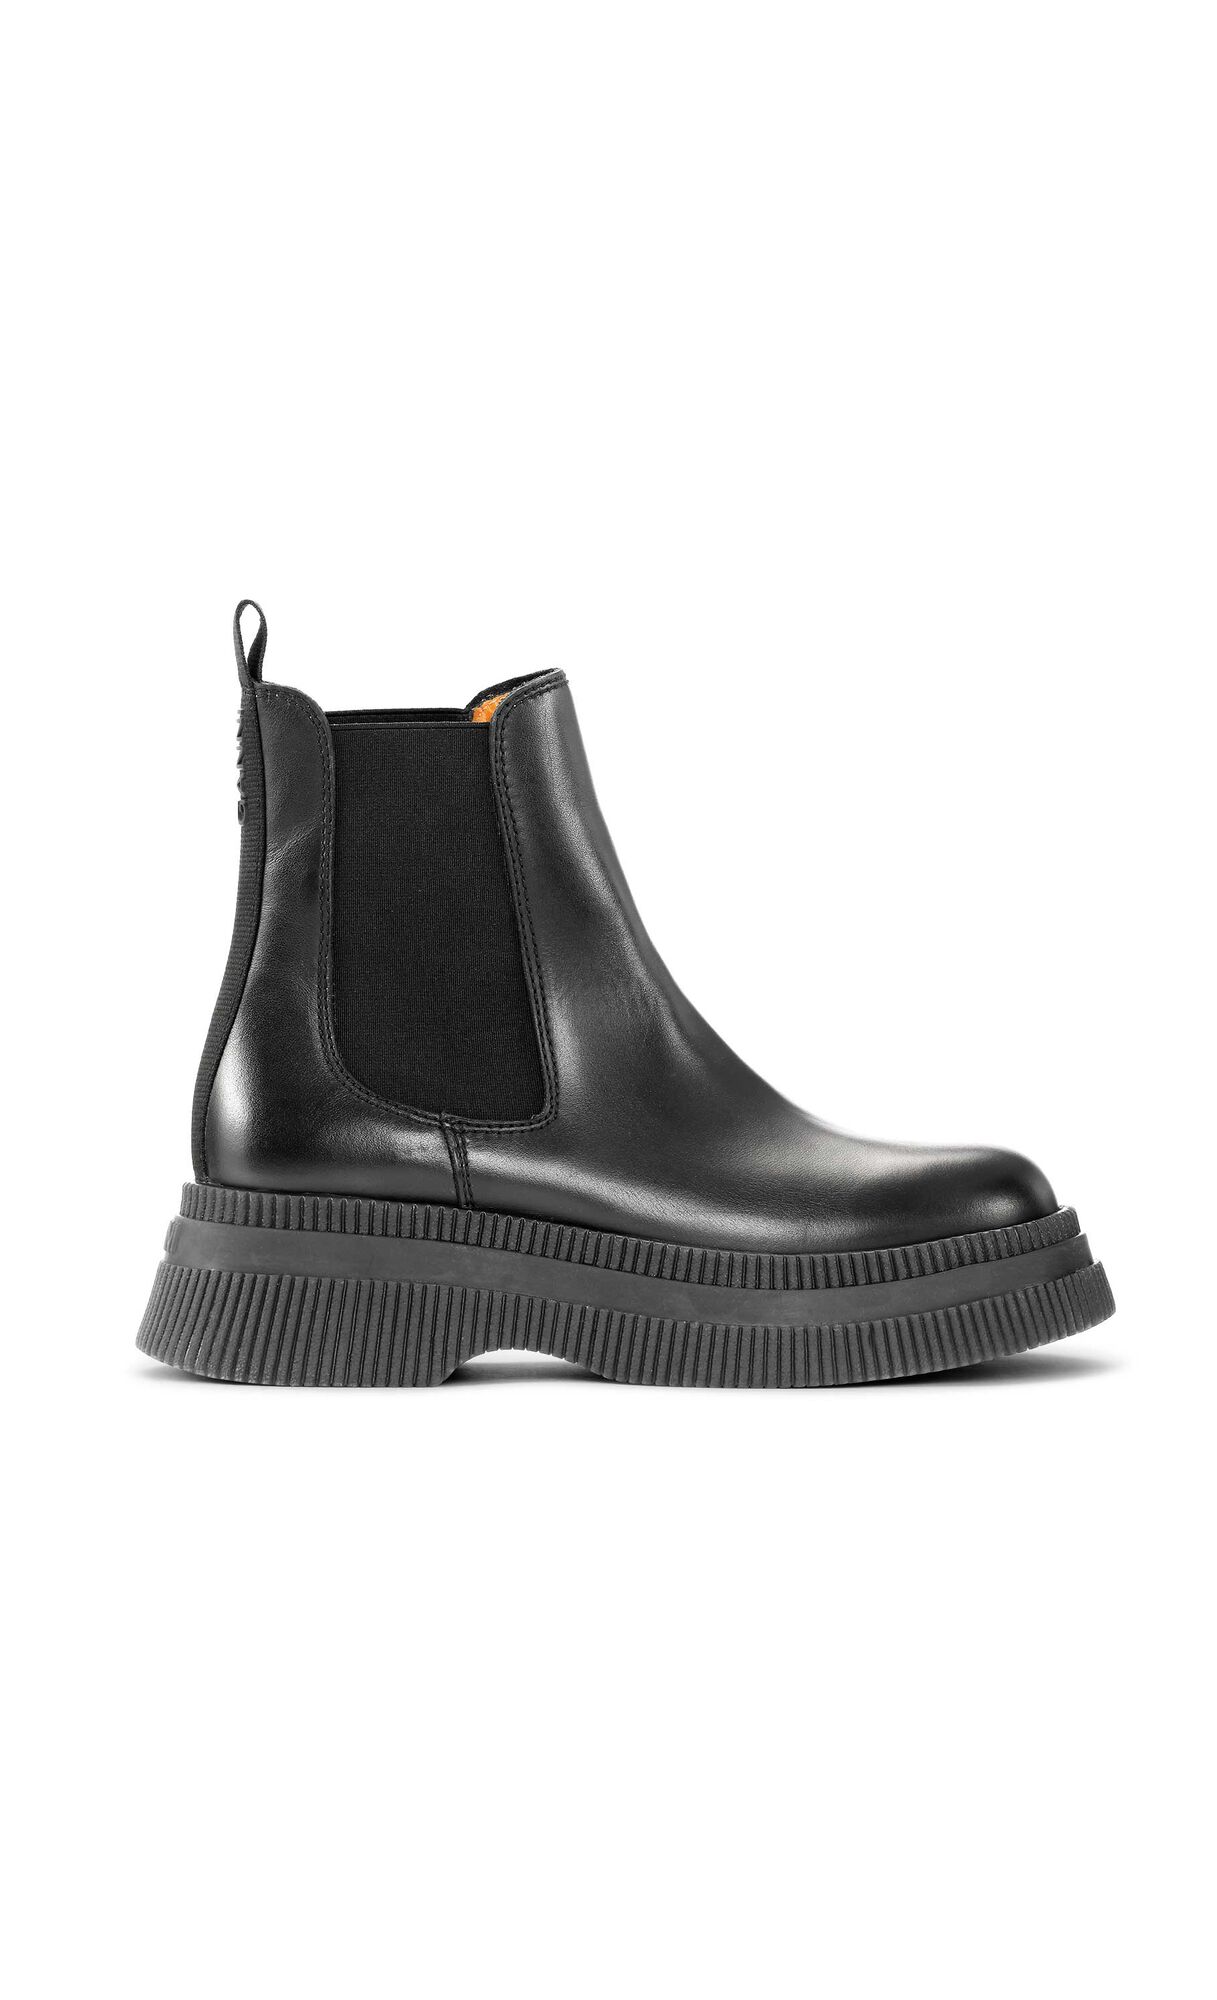 Black Creepers Chelsea Boots | US